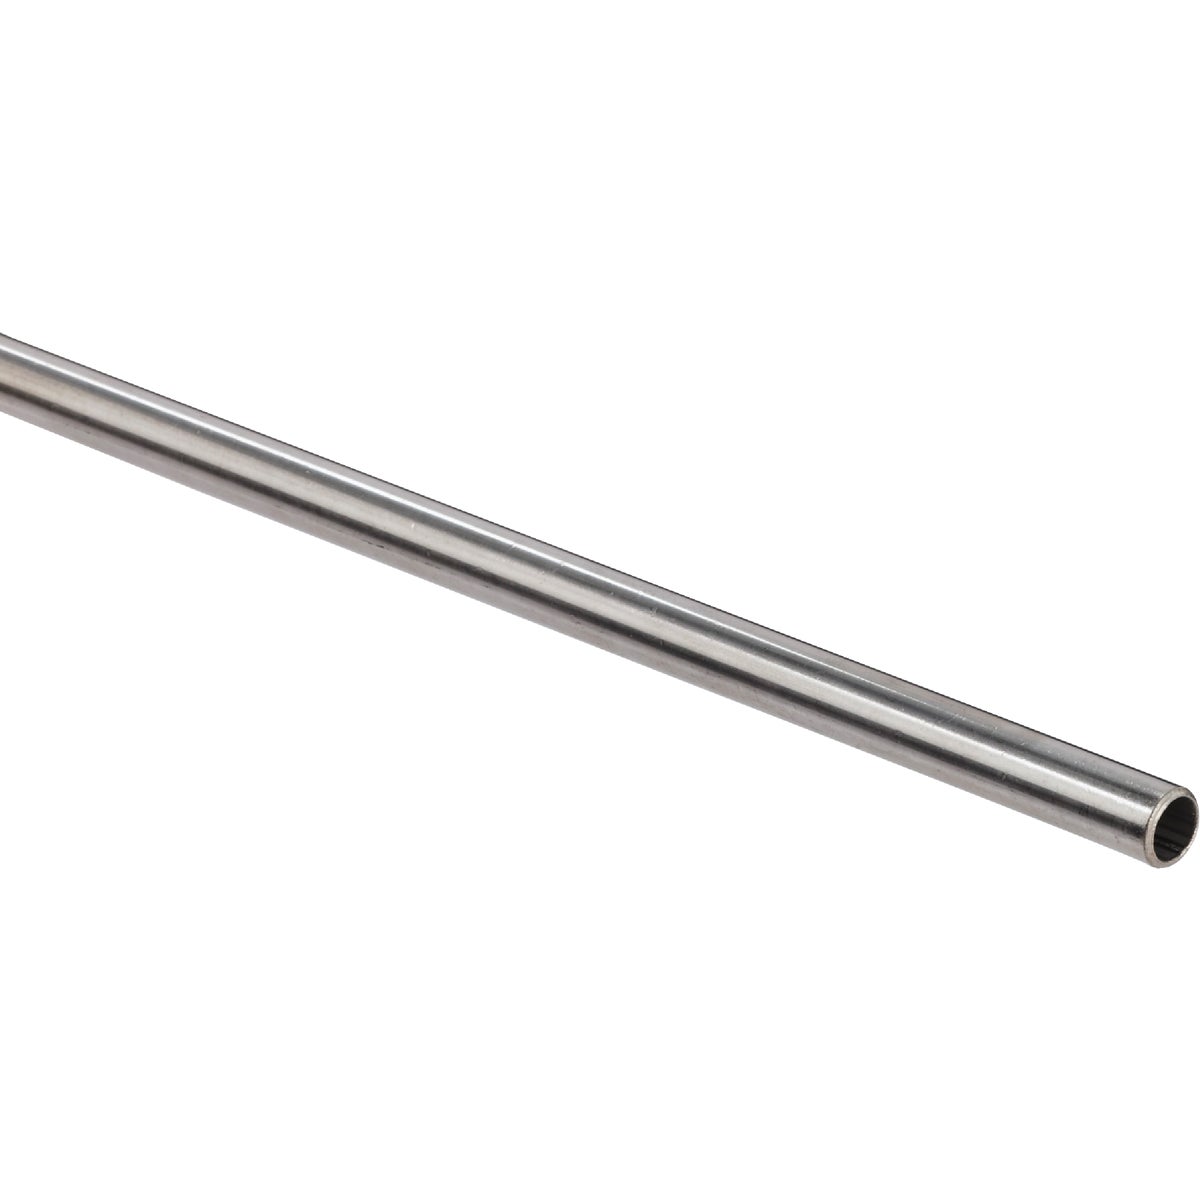 K&S Stainless Steel 7/16 In. O.D. x 1 Ft. Round Tube Stock